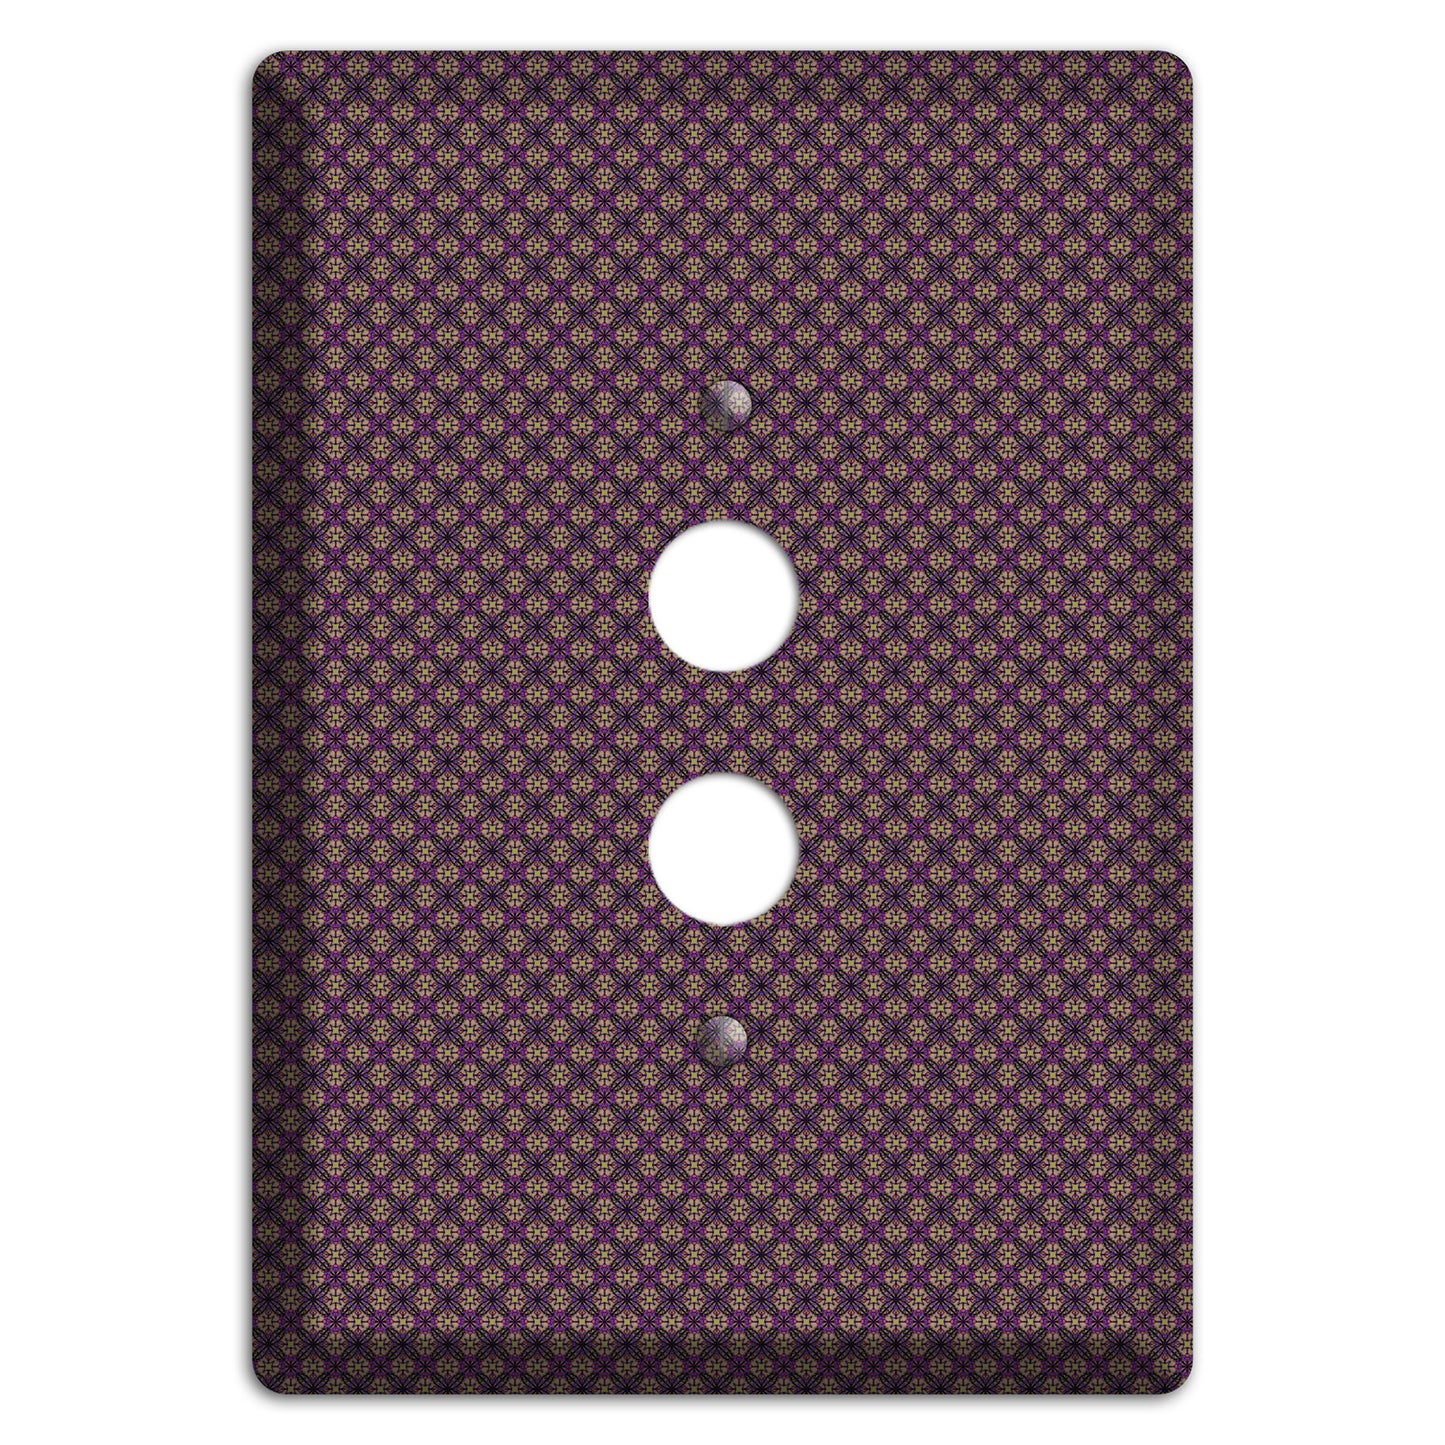 Brown and Purple Tiny Arabesque 1 Pushbutton Wallplate